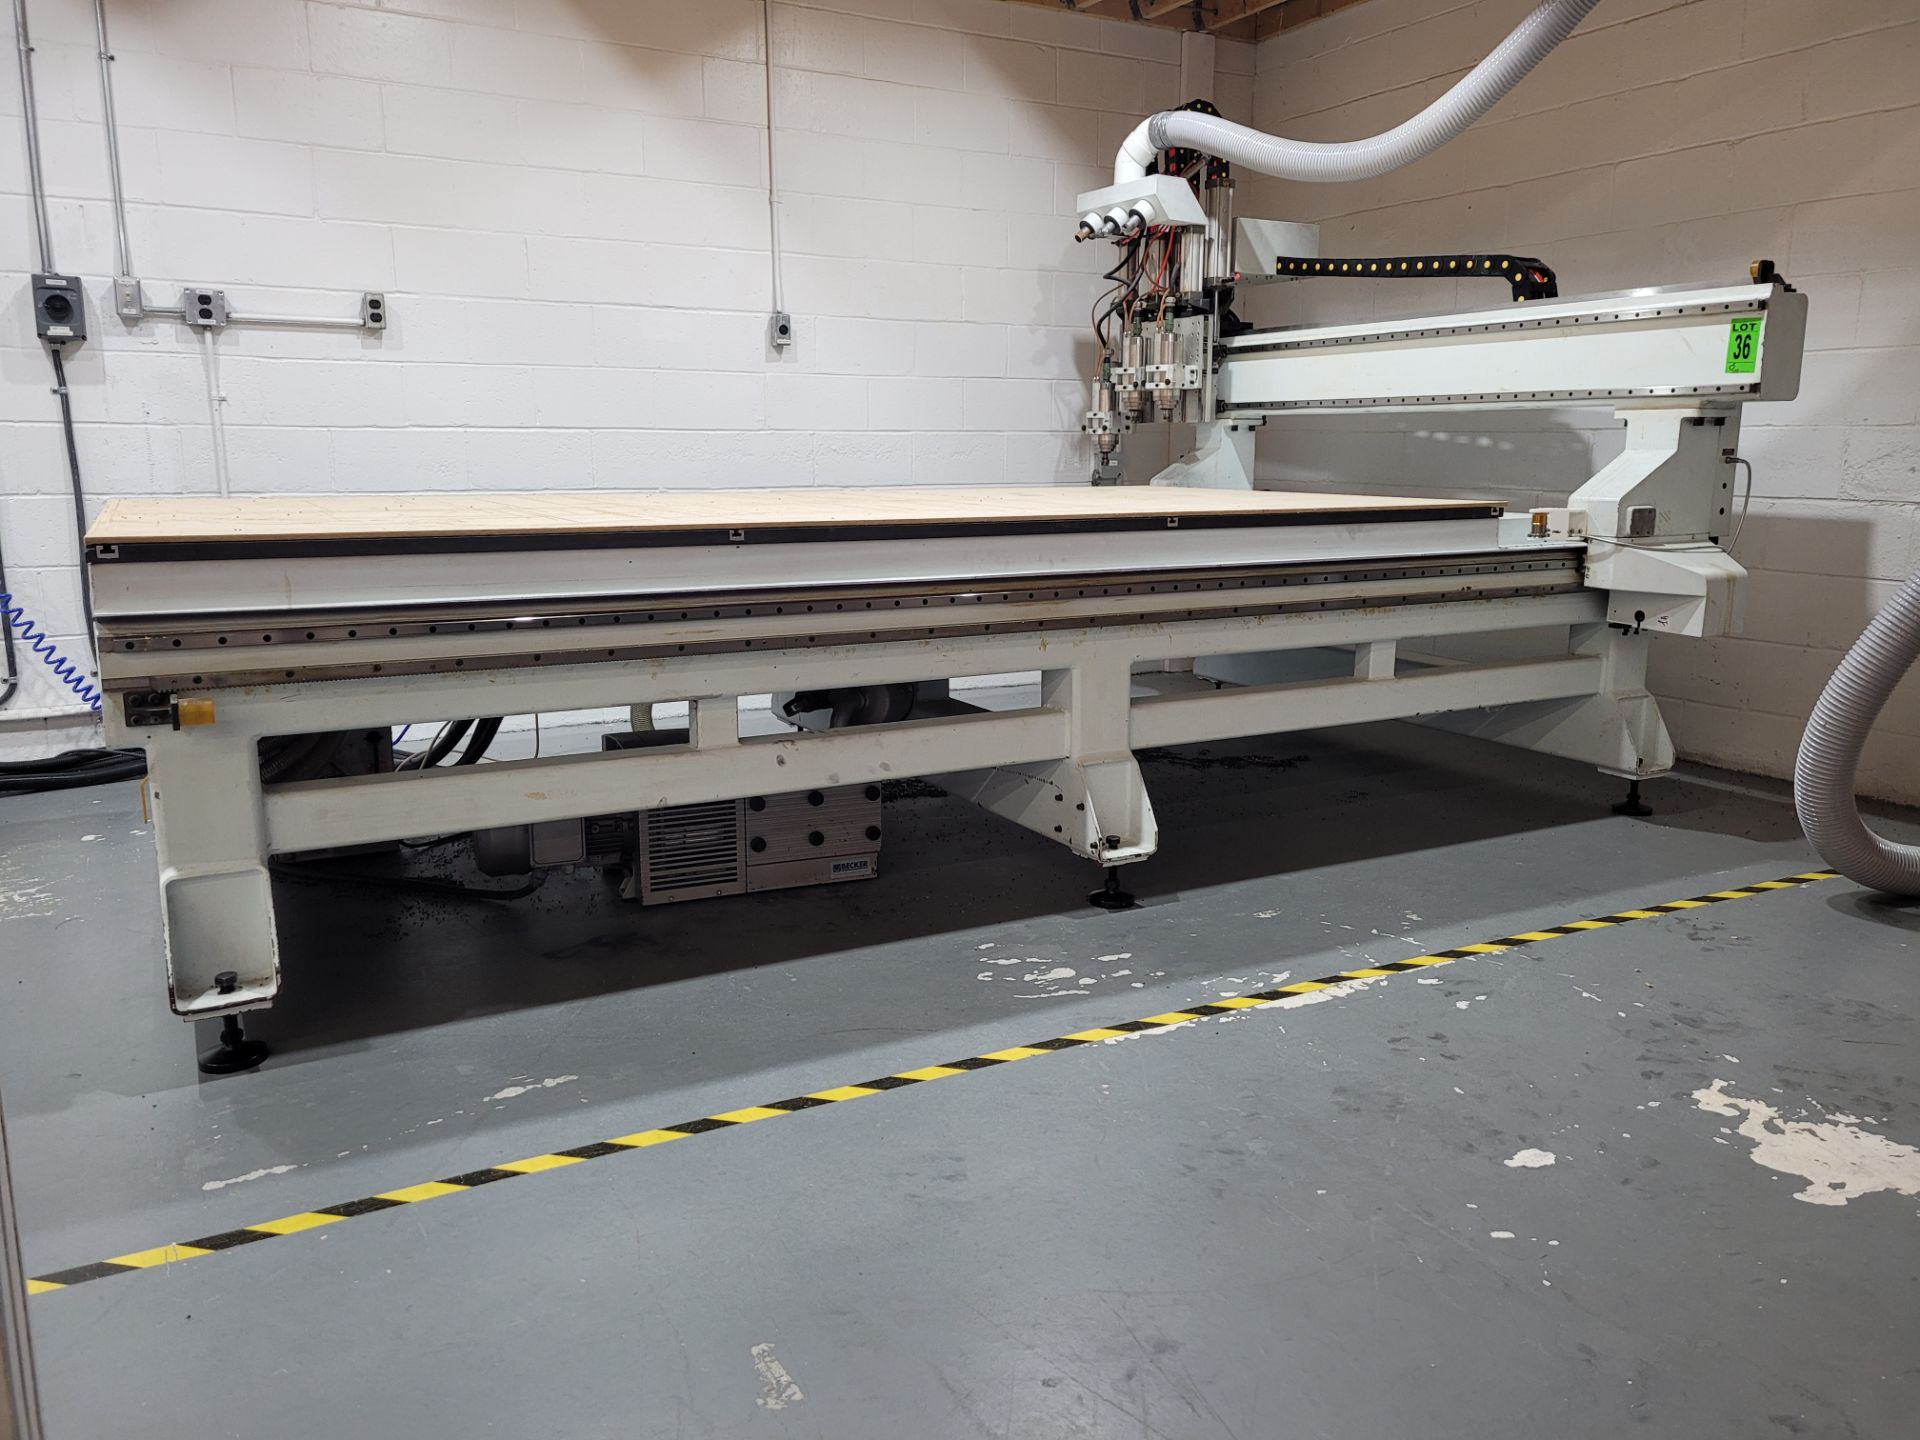 2015 SUDA ATC CNC Router mod. MG1630C, 3-Head System with Accessories and CRAFTEX mod. FM-300 Collec - Image 16 of 51